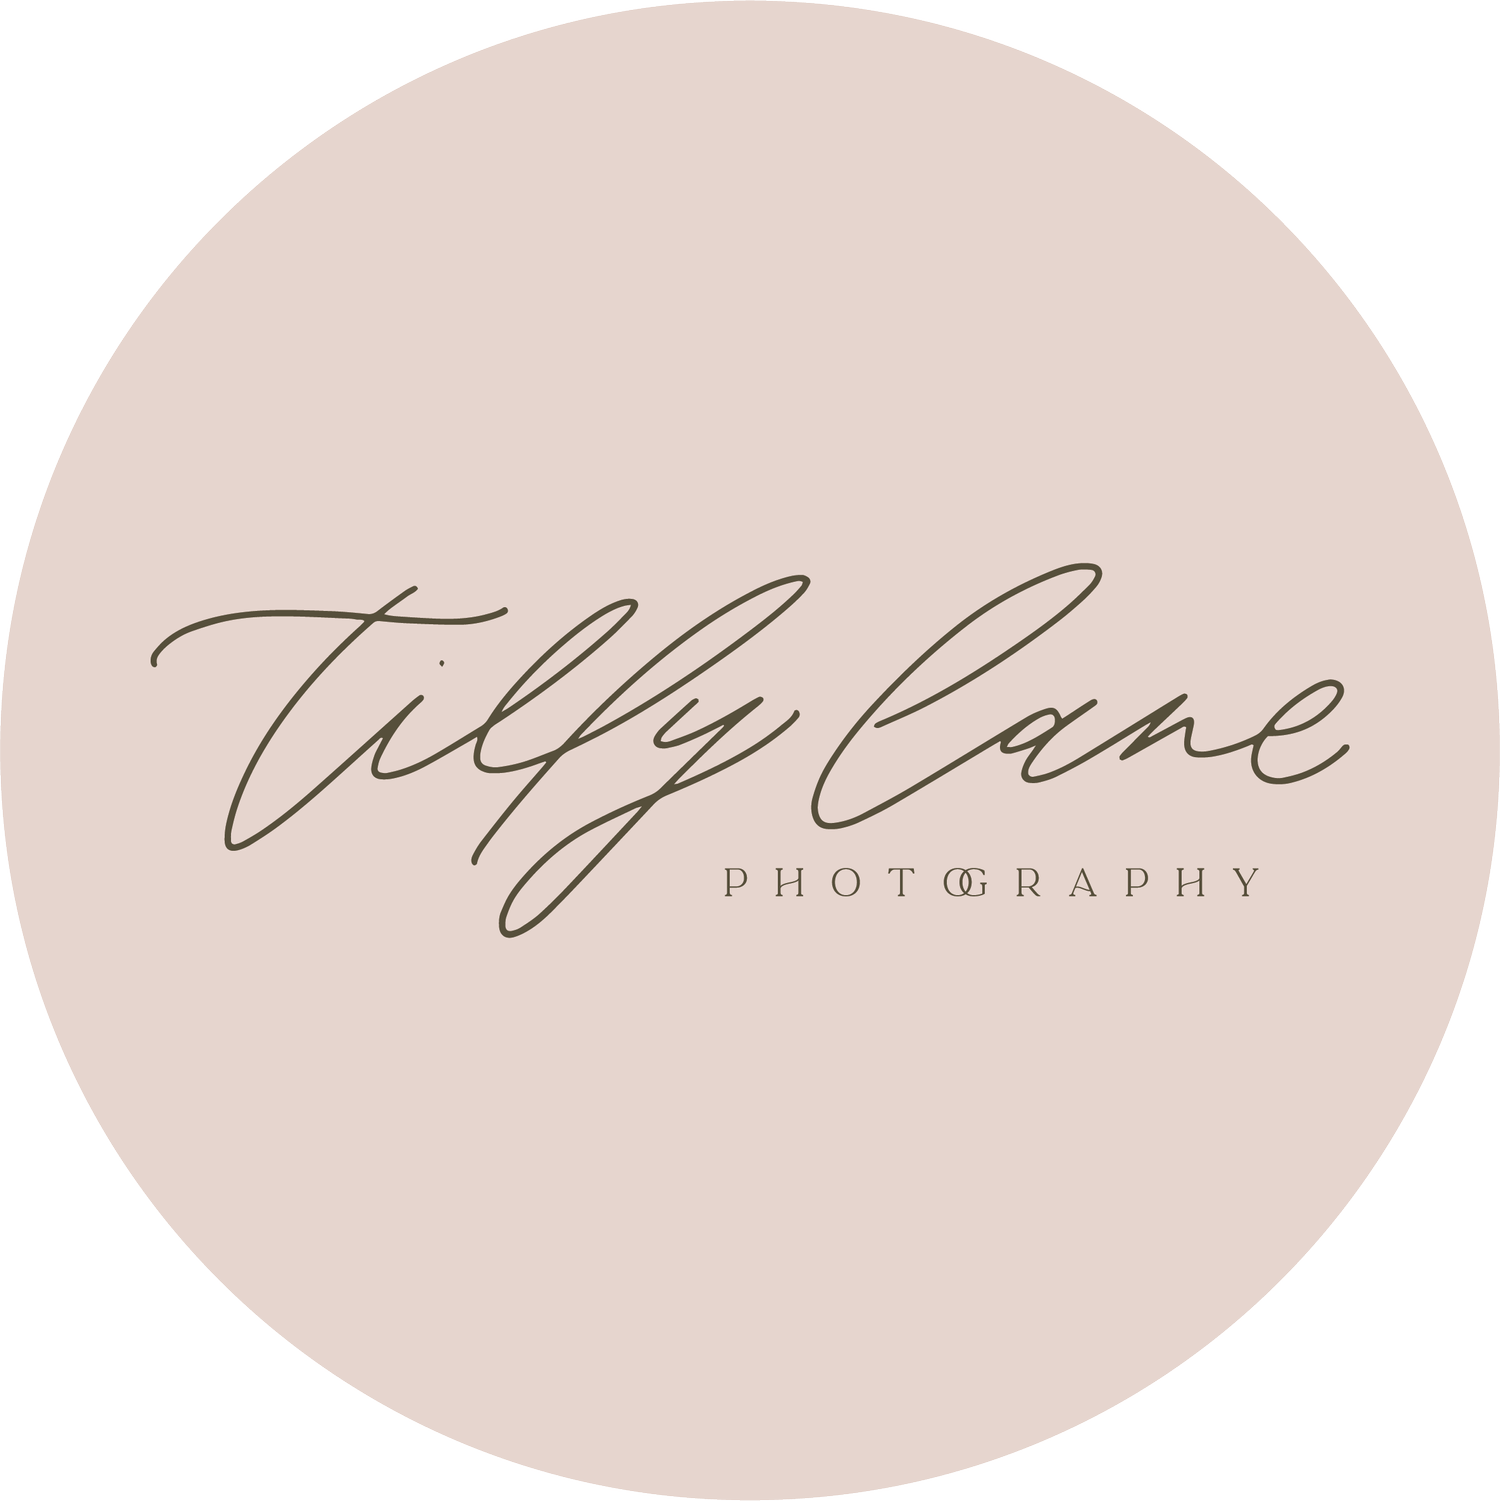 Tilly Lane Photography